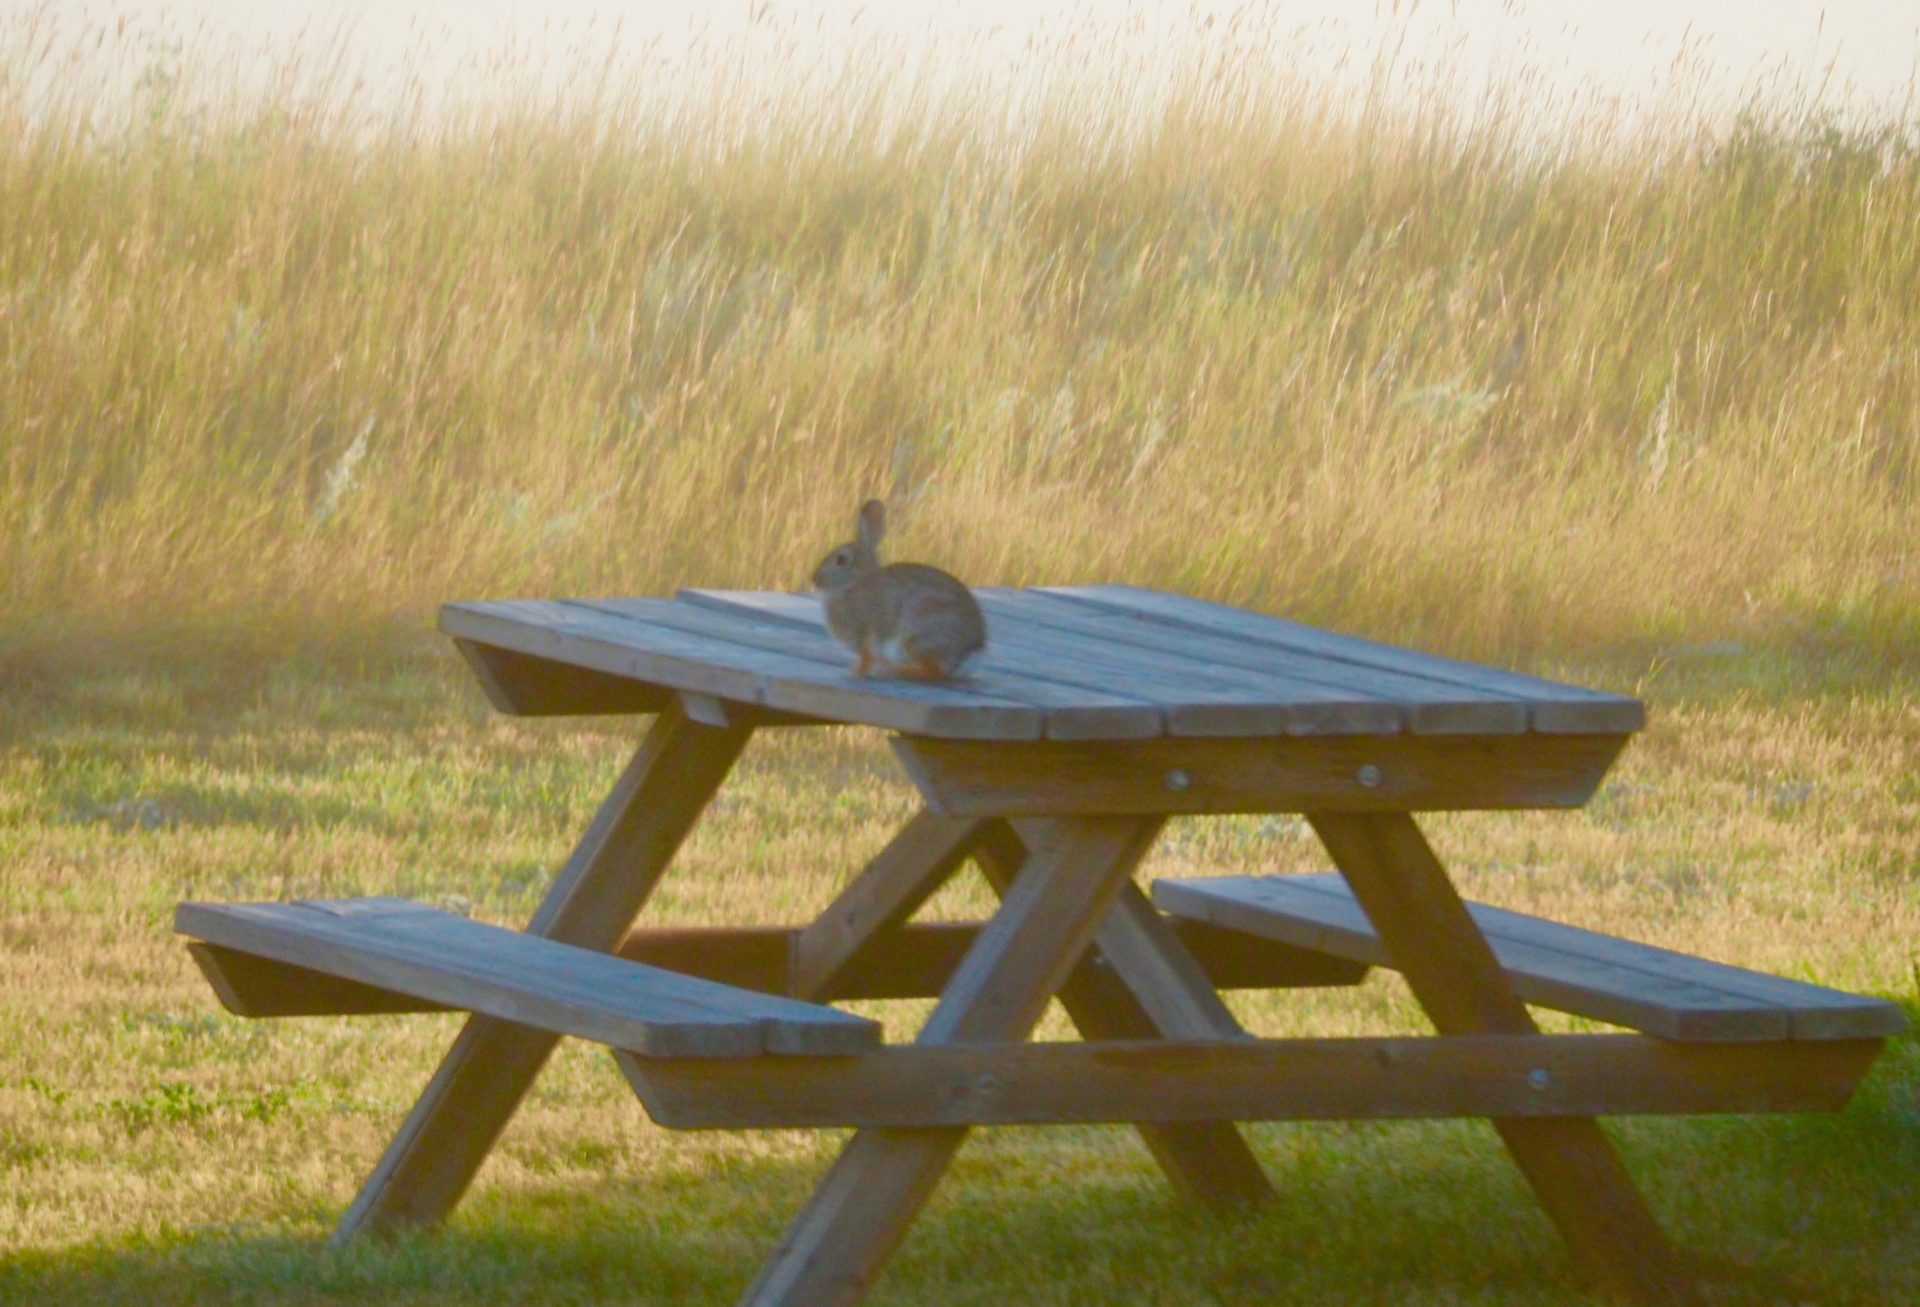 Rabbit on a Picnic Table